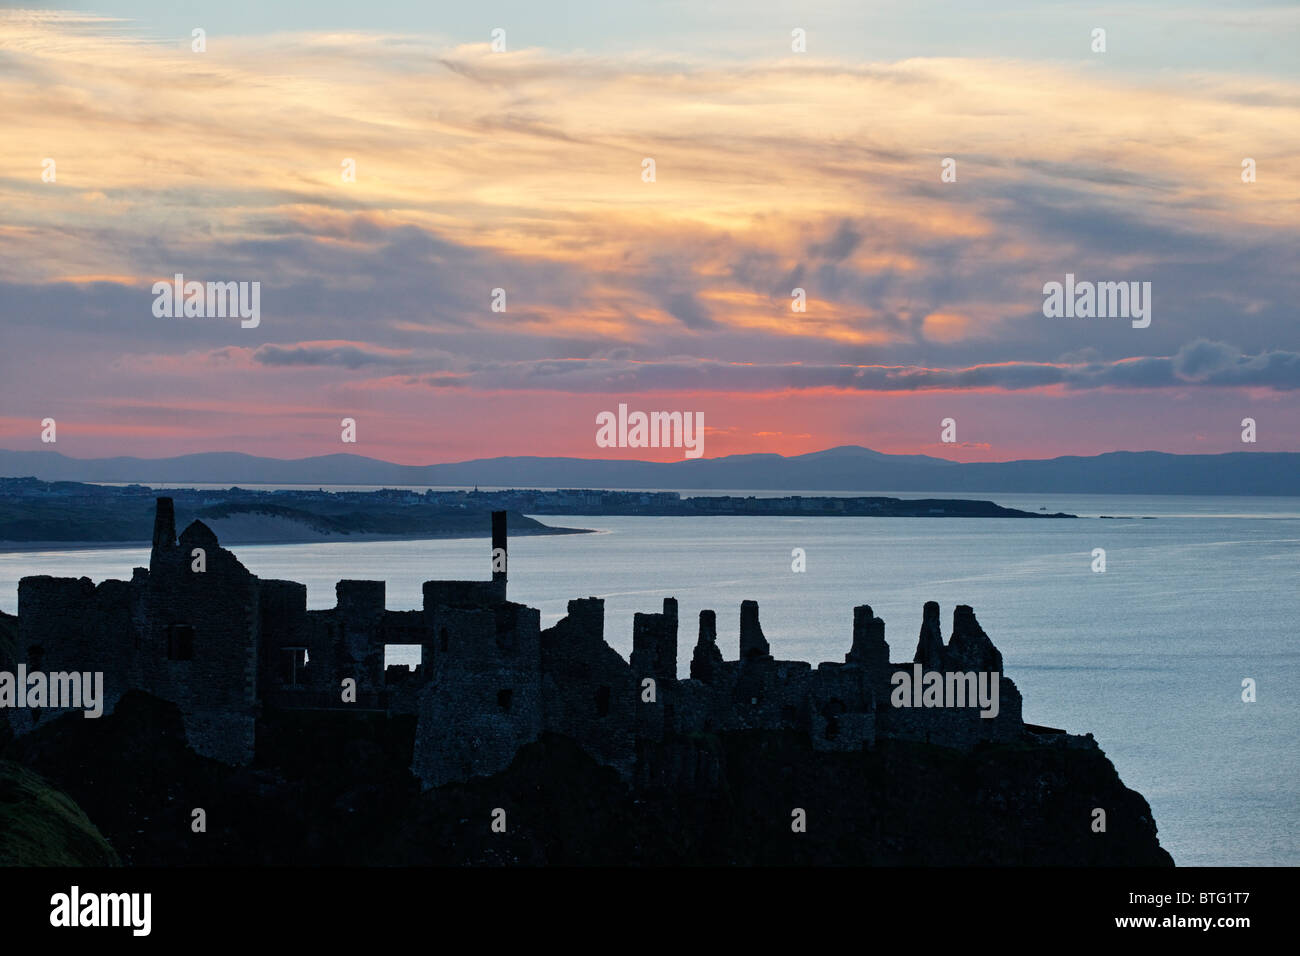 Dunluce Castle, County Antrim, Ulster, Northern Ireland, UK. Silhouette of ruins at sunset. Stock Photo